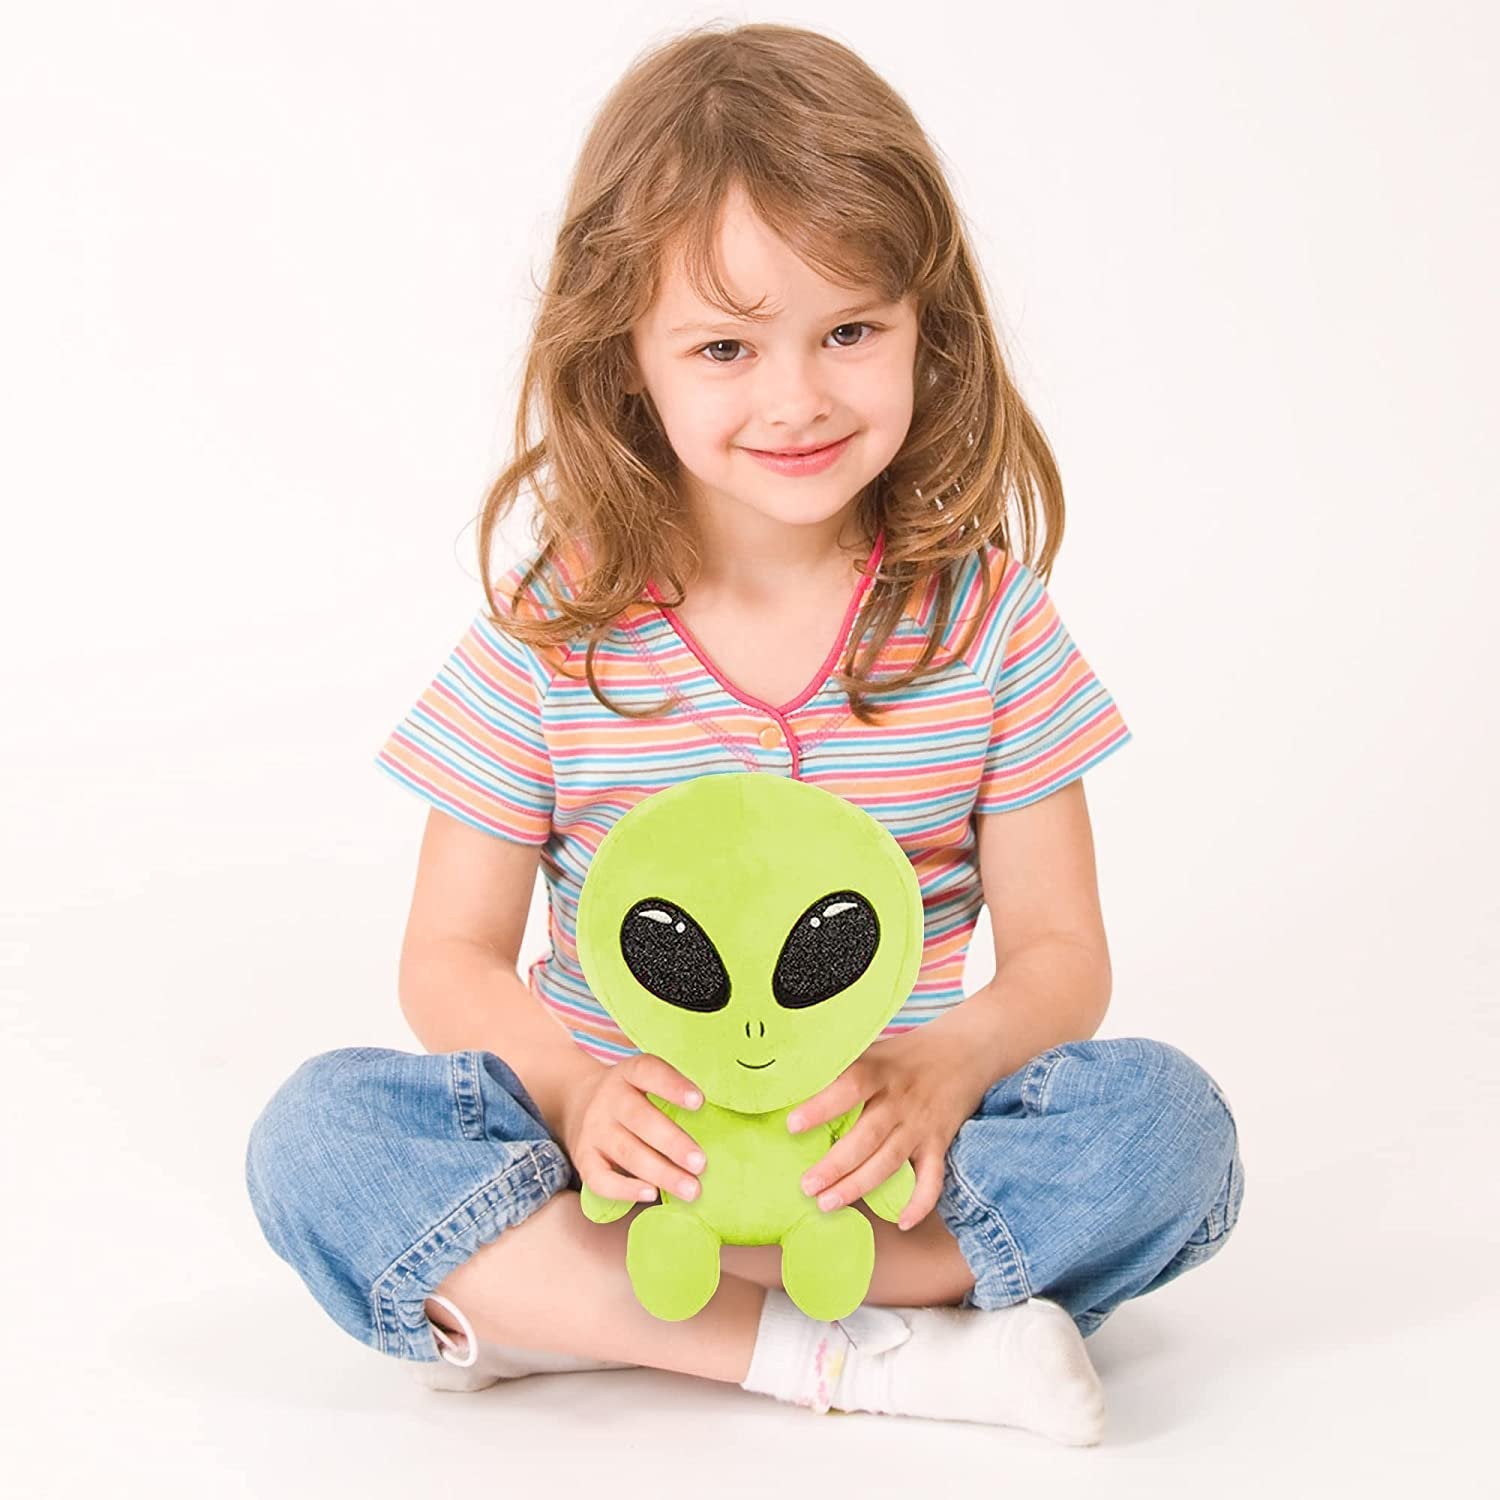 Plush Alien Stuffed Toys for Kids, Set of 3, Super Soft Stuffed Space Toys in Vibrant Colors, Galaxy Party Decorations, Outer Space Party Favors, Huggable Space Alien Gifts for Kids